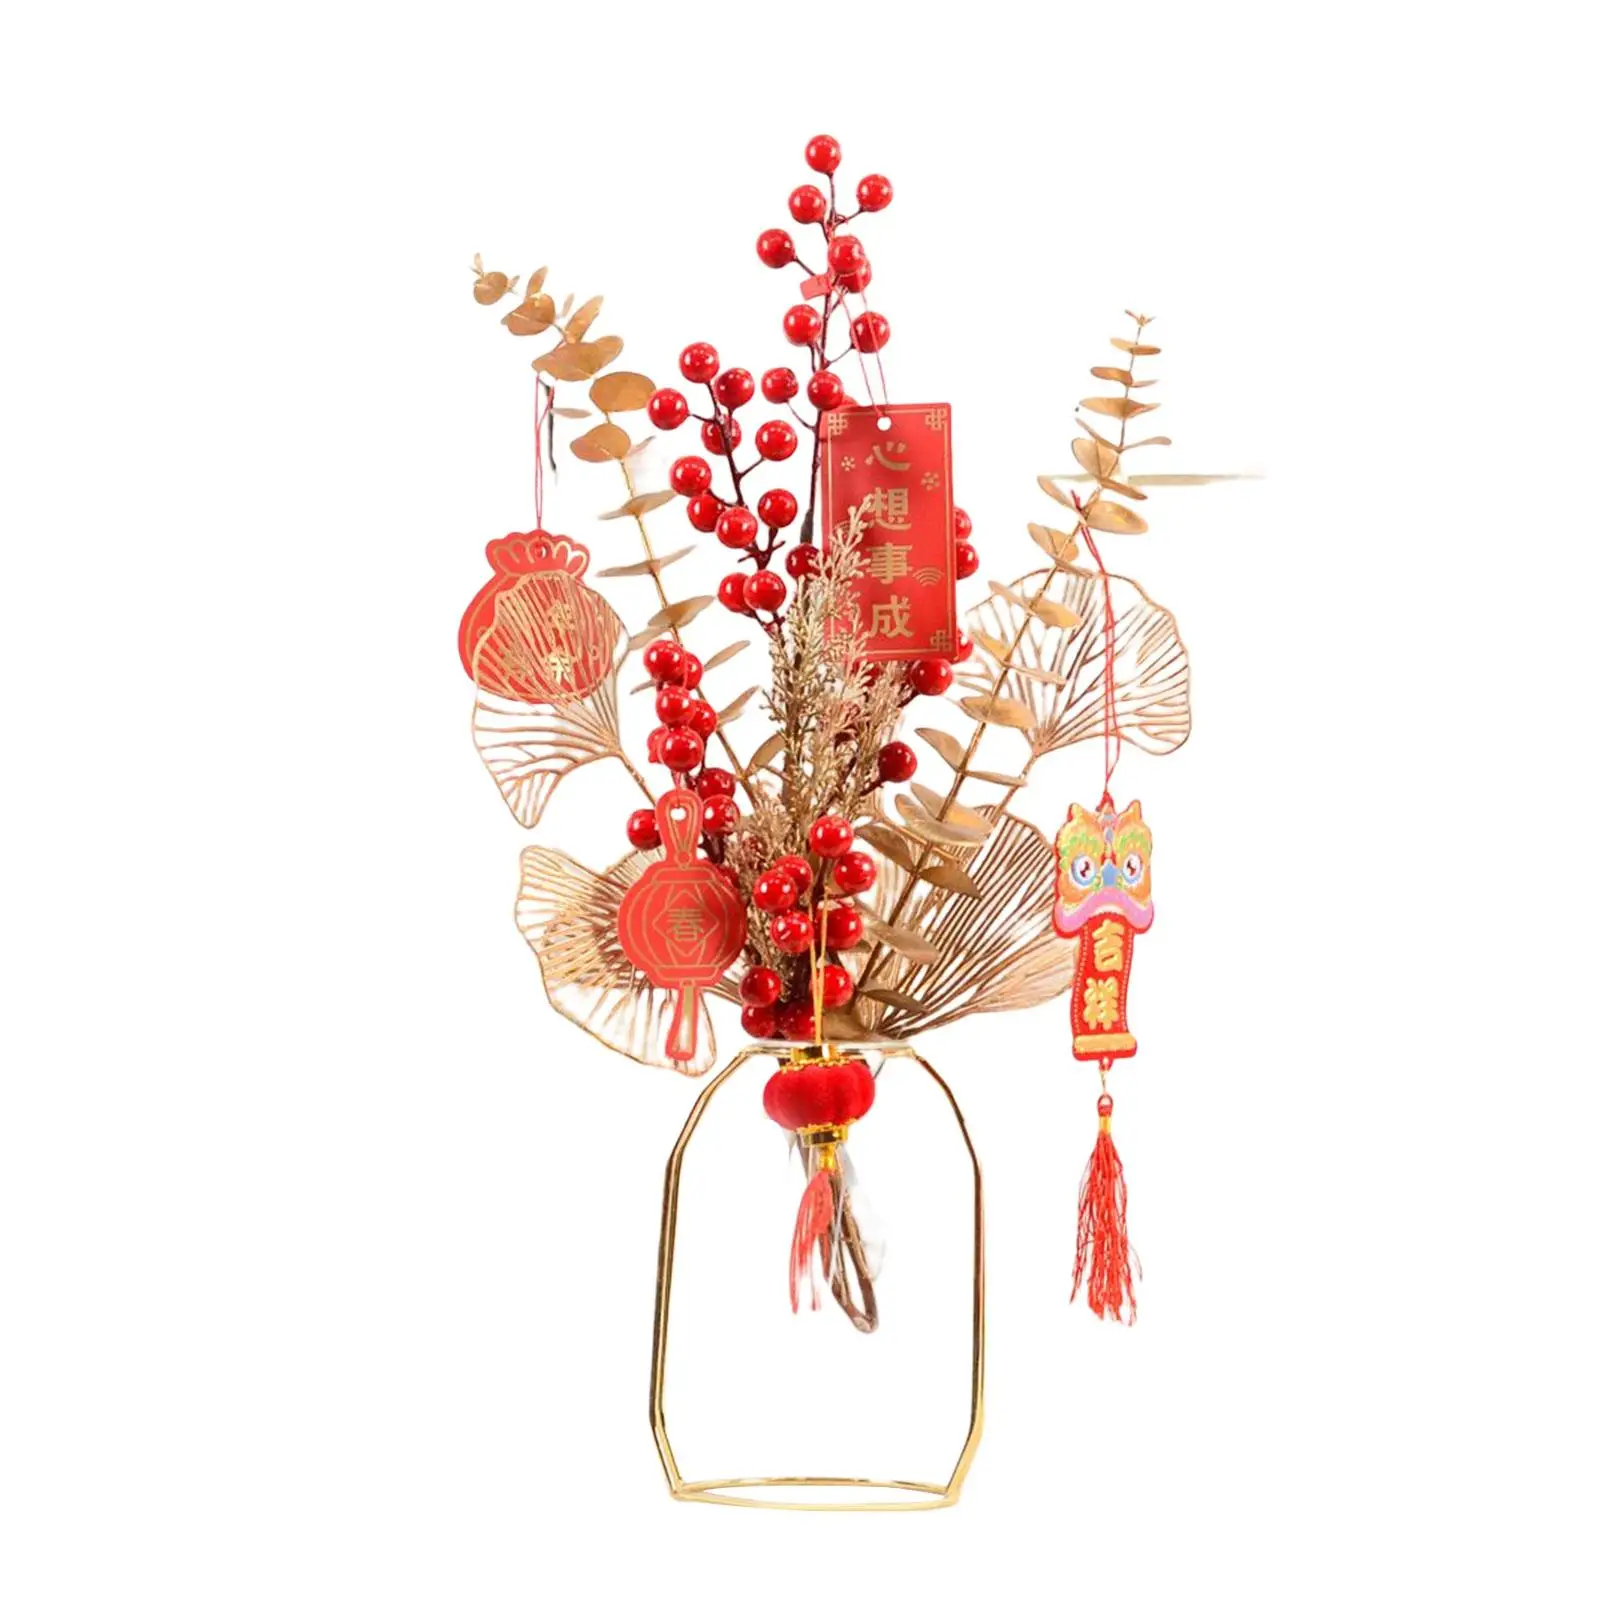 Chinese New Year Decorations Artificial Berries Branches Art Crafts Harvest Charms for Living Room Office Indoor New Year Decor